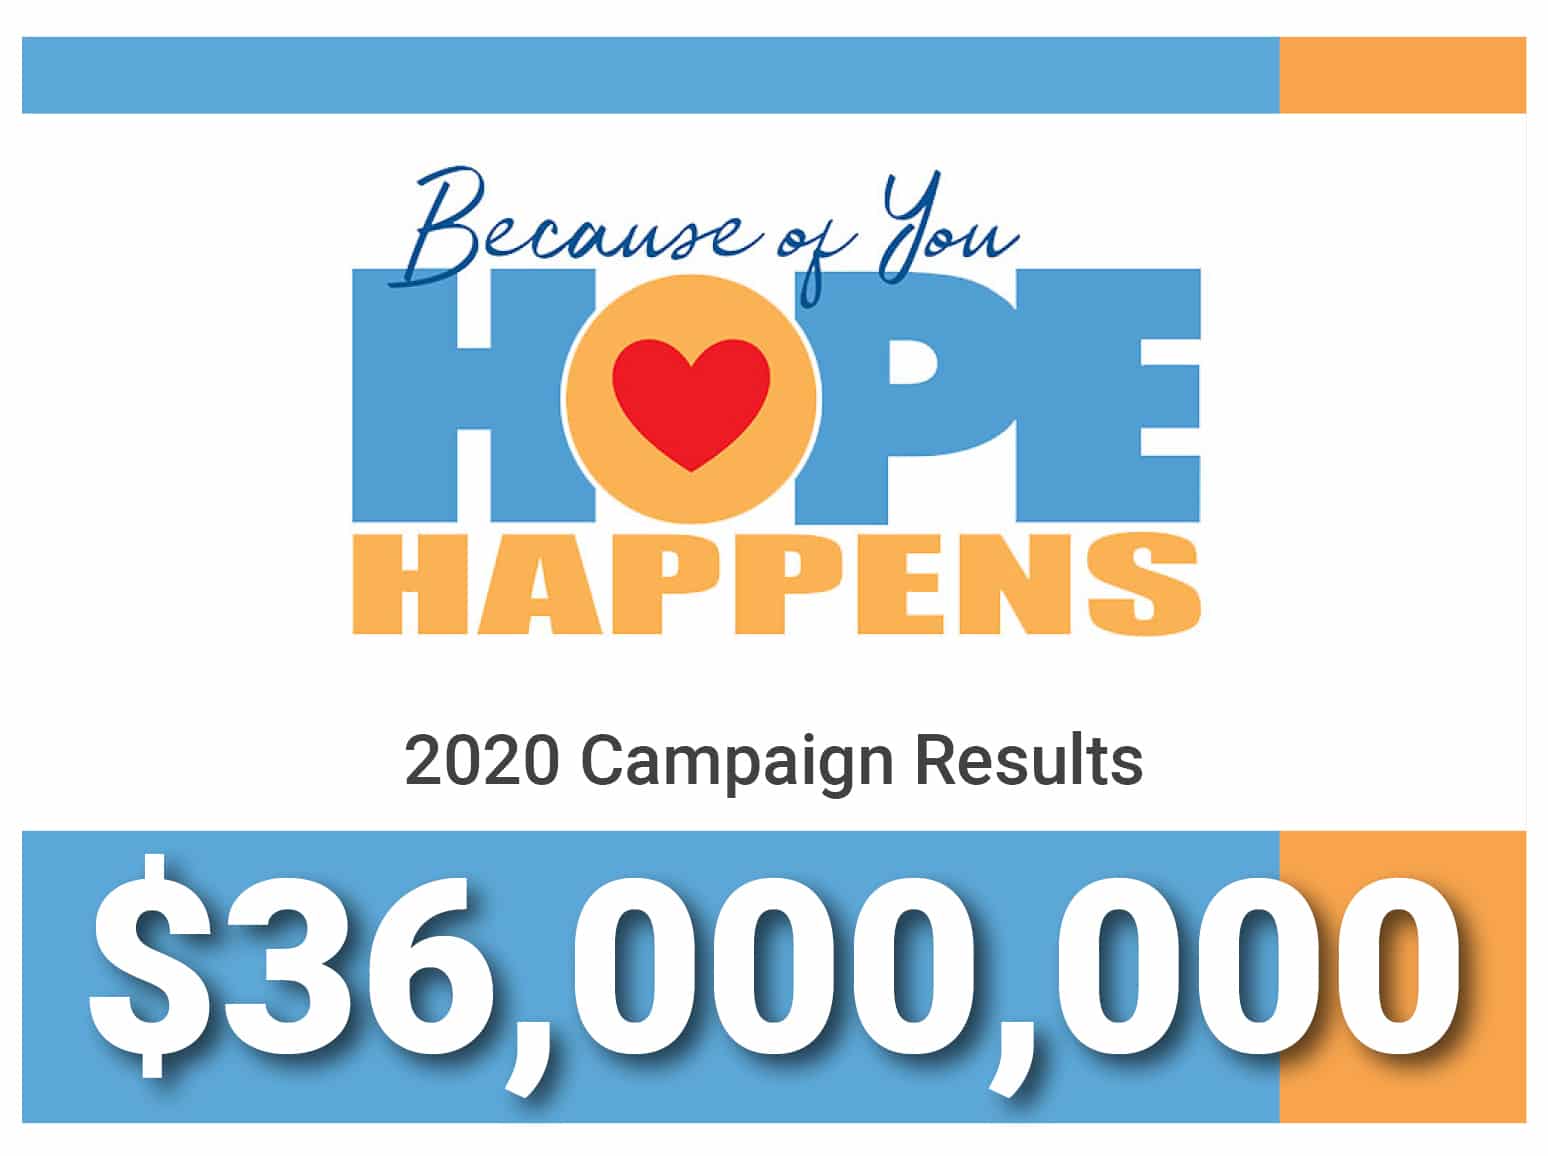 2020 goal announcement 1 up United Way of Central Alabama surpasses 2020 campaign goal by $1.5M, despite the pandemic